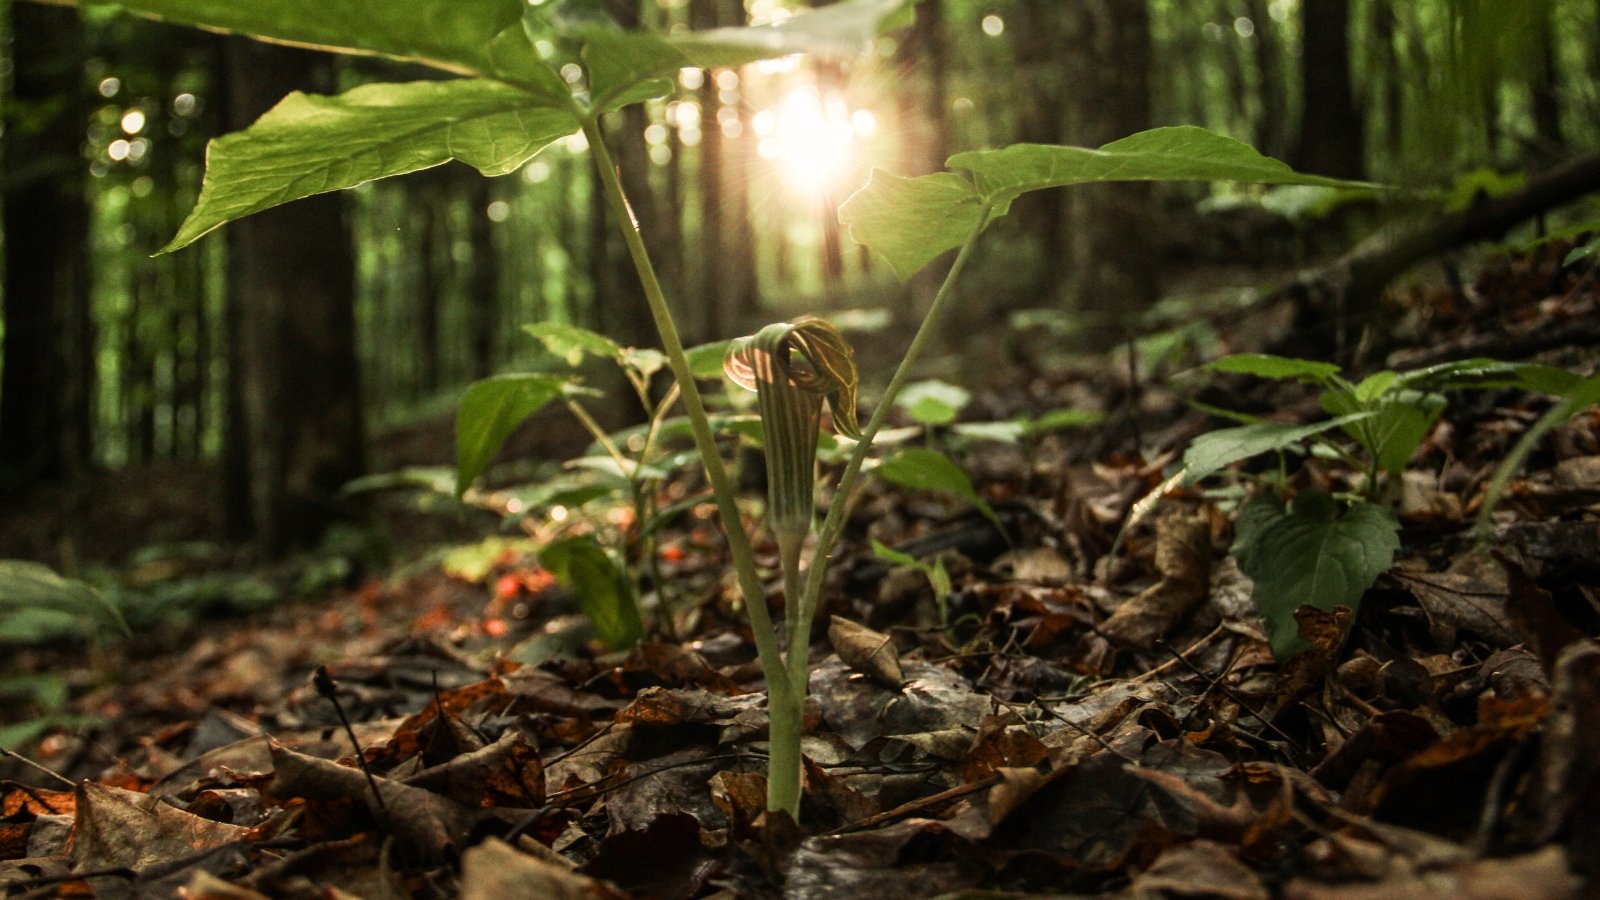 Sun shines through deciduous forest with a Jack-in-the-Pulpit plant forming a unique bloom, consisting of a striped, hooded spathe over a spadix, and complemented by its broad, trifoliate leaves.